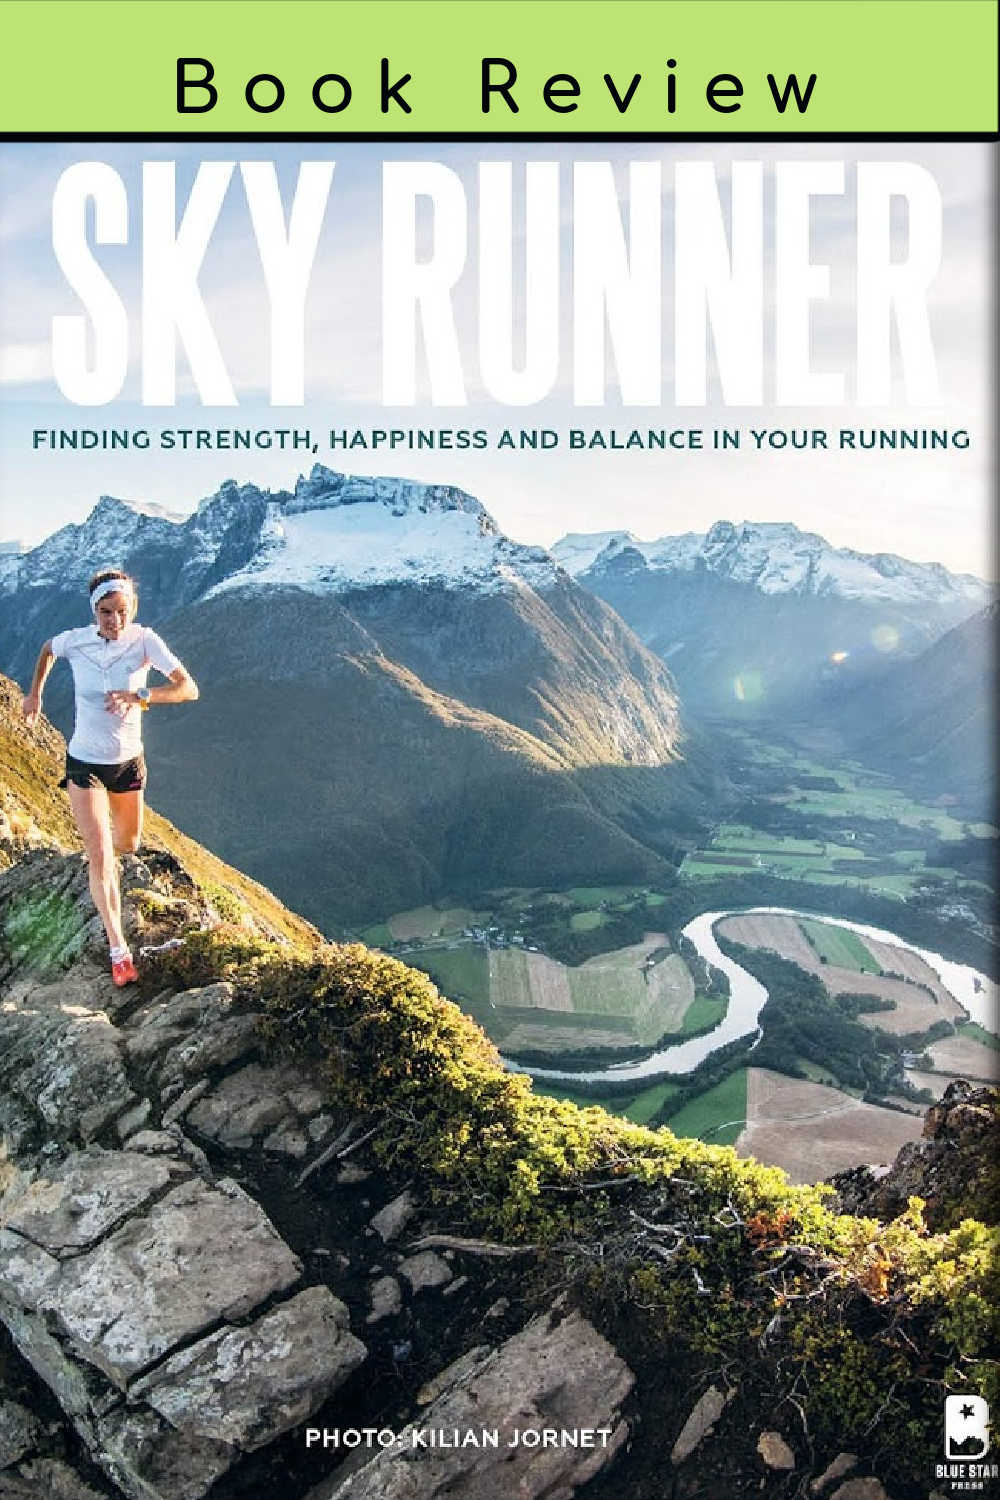 Book Review: Sky Runner: Finding Strength, Happiness, and Balance in Your Running